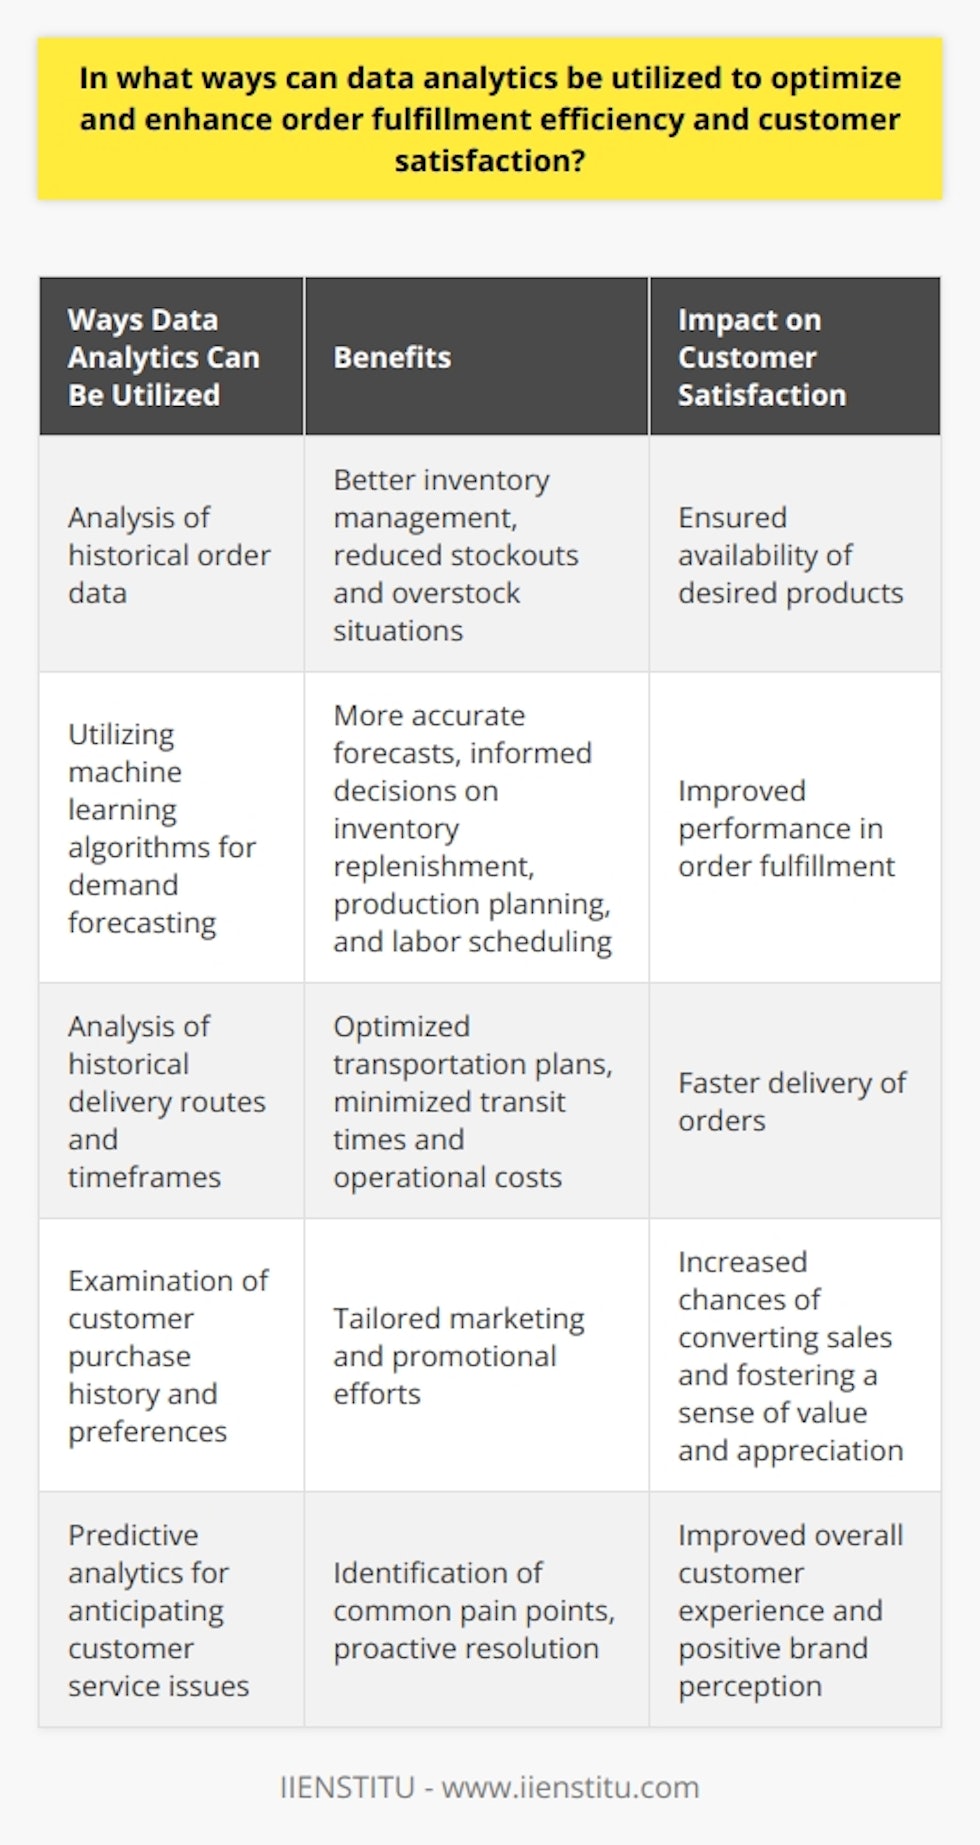 Data analytics is a crucial tool for businesses to optimize and enhance order fulfillment efficiency and customer satisfaction. By analyzing historical order data, businesses can identify patterns and trends in demand, helping them better manage inventory levels. This reduces the likelihood of stockouts or overstock situations and ensures the availability of desired products, ultimately enhancing customer satisfaction.In addition, data analytics plays a vital role in demand forecasting. By utilizing machine learning algorithms, businesses can generate more accurate forecasts and make informed decisions about inventory replenishment, production planning, and labor scheduling. This leads to improved performance in fulfilling orders and higher customer satisfaction levels.The implementation of data analytics in the delivery process can substantially enhance order fulfillment efficiency. By analyzing historical delivery routes and timeframes, businesses can optimize transportation plans to minimize transit times and operational costs. This results in faster delivery of orders to customers, leading to heightened satisfaction and a stronger likelihood of repeat purchases.Furthermore, data analytics can be instrumental in personalizing the customer experience. By examining customer purchase history and preferences, businesses can tailor marketing and promotional efforts to better resonate with their target audience. This not only increases the chances of converting sales but also fosters a sense of value and appreciation that further bolsters customer satisfaction.Predictive analytics can also be employed to anticipate customer service issues before they escalate. By analyzing past customer interactions and complaints, businesses can identify common pain points and proactively address them. This preventative approach to customer service significantly improves the overall experience and reinforces positive brand perception.To conclude, data analytics is a powerful tool that businesses can utilize to optimize and enhance order fulfillment efficiency and customer satisfaction. By analyzing historical data, predicting demand, optimizing delivery processes, personalizing customer experiences, and employing predictive analytics in customer service, businesses can better meet customer expectations and foster long-lasting relationships.